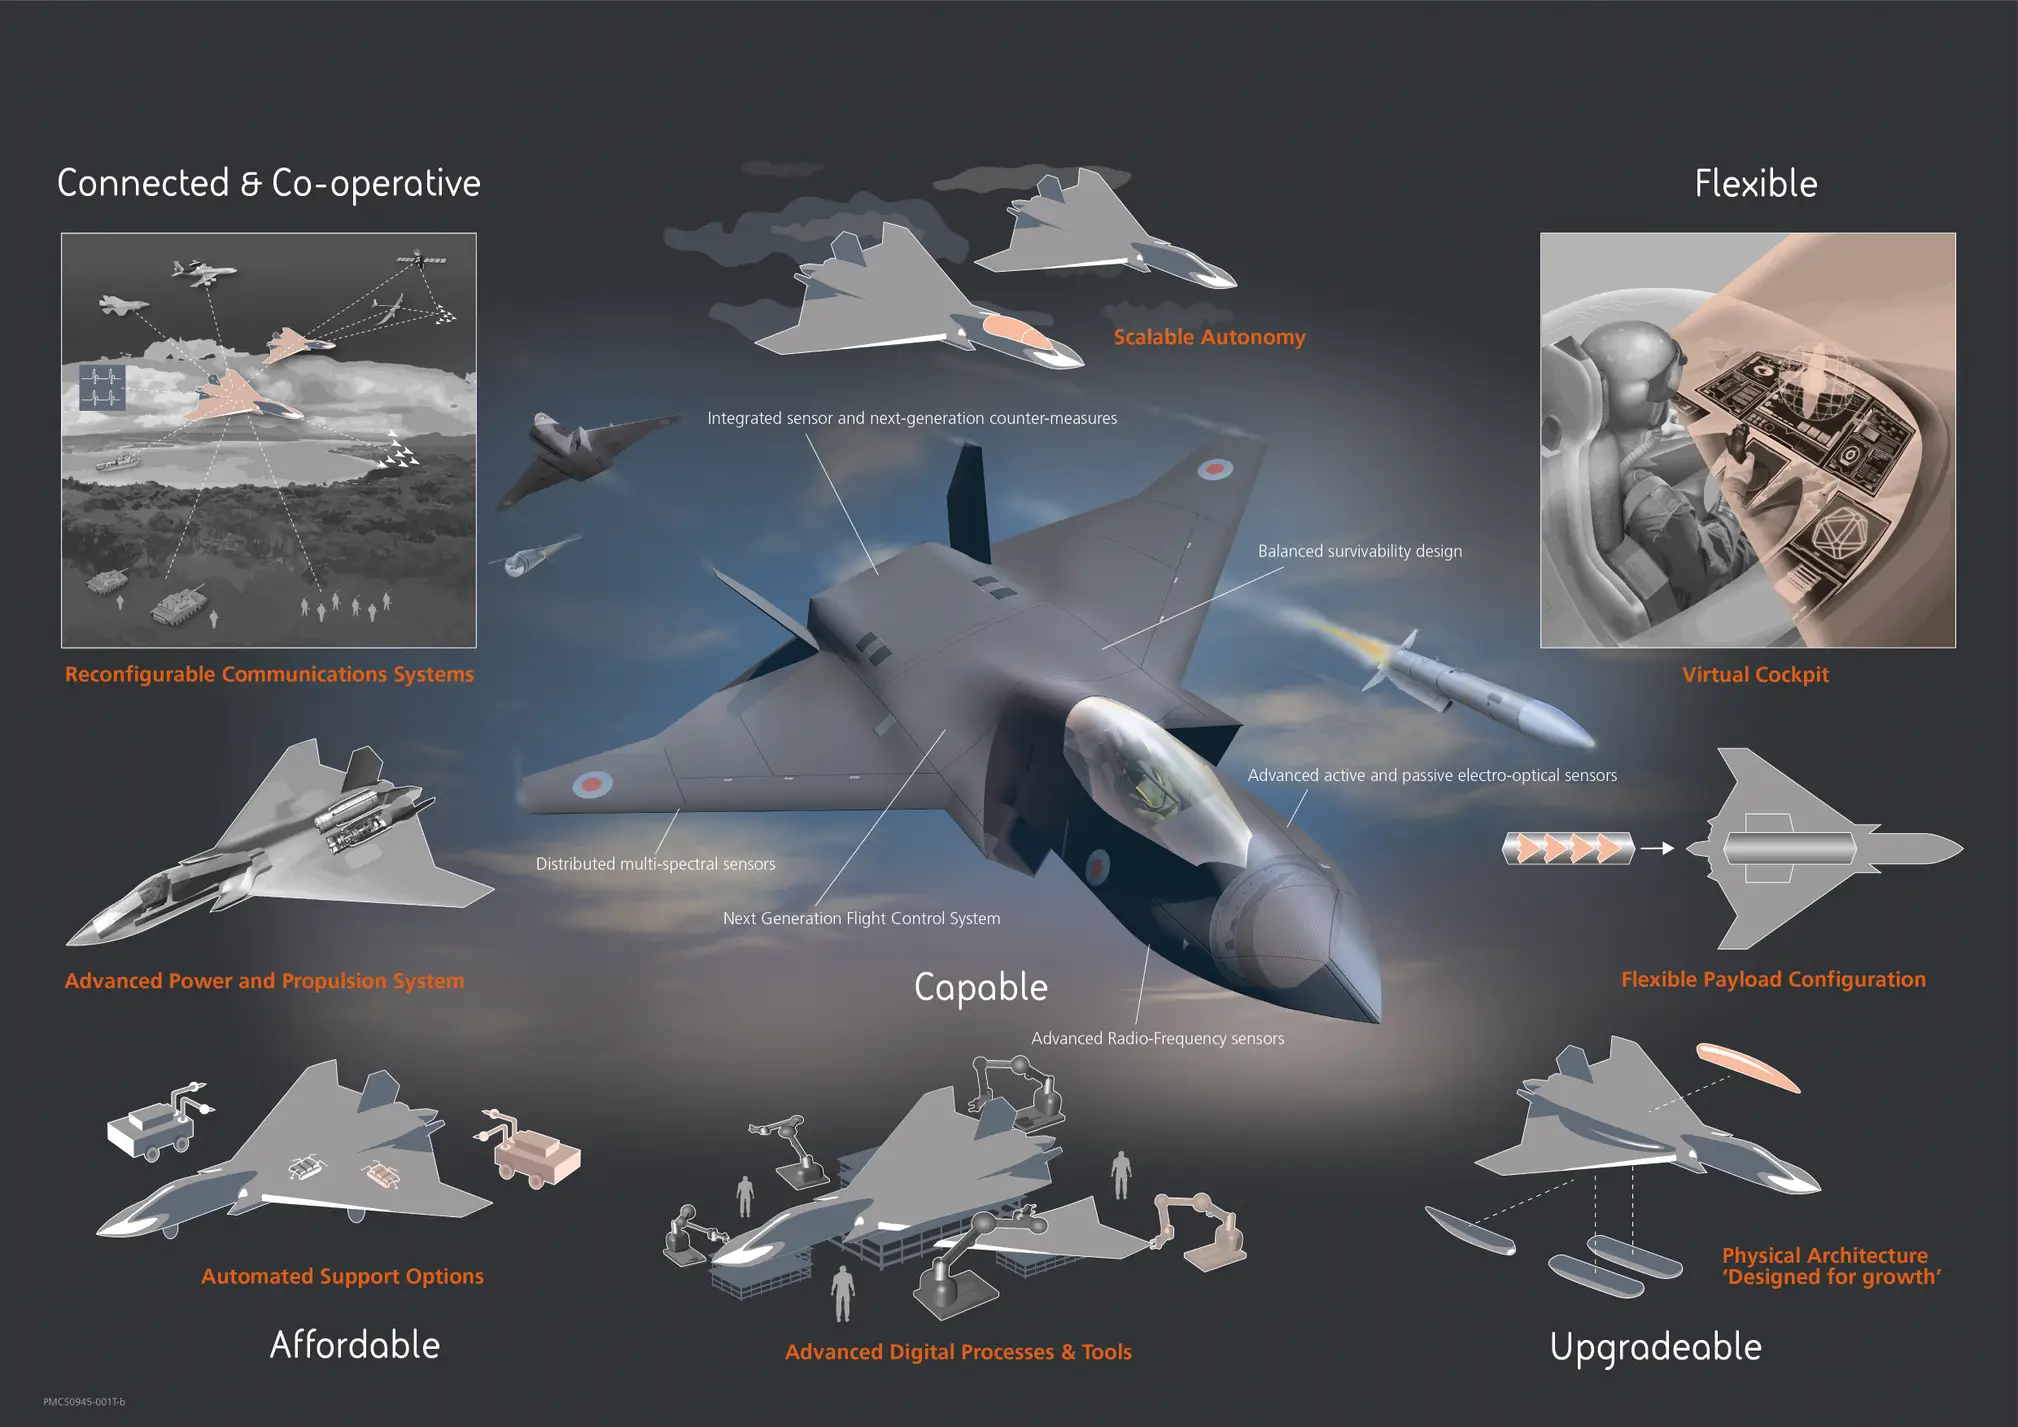 Let’s Look At The UK’s Plan To Fly A Tempest Fighter Demonstrator In Just Five Years